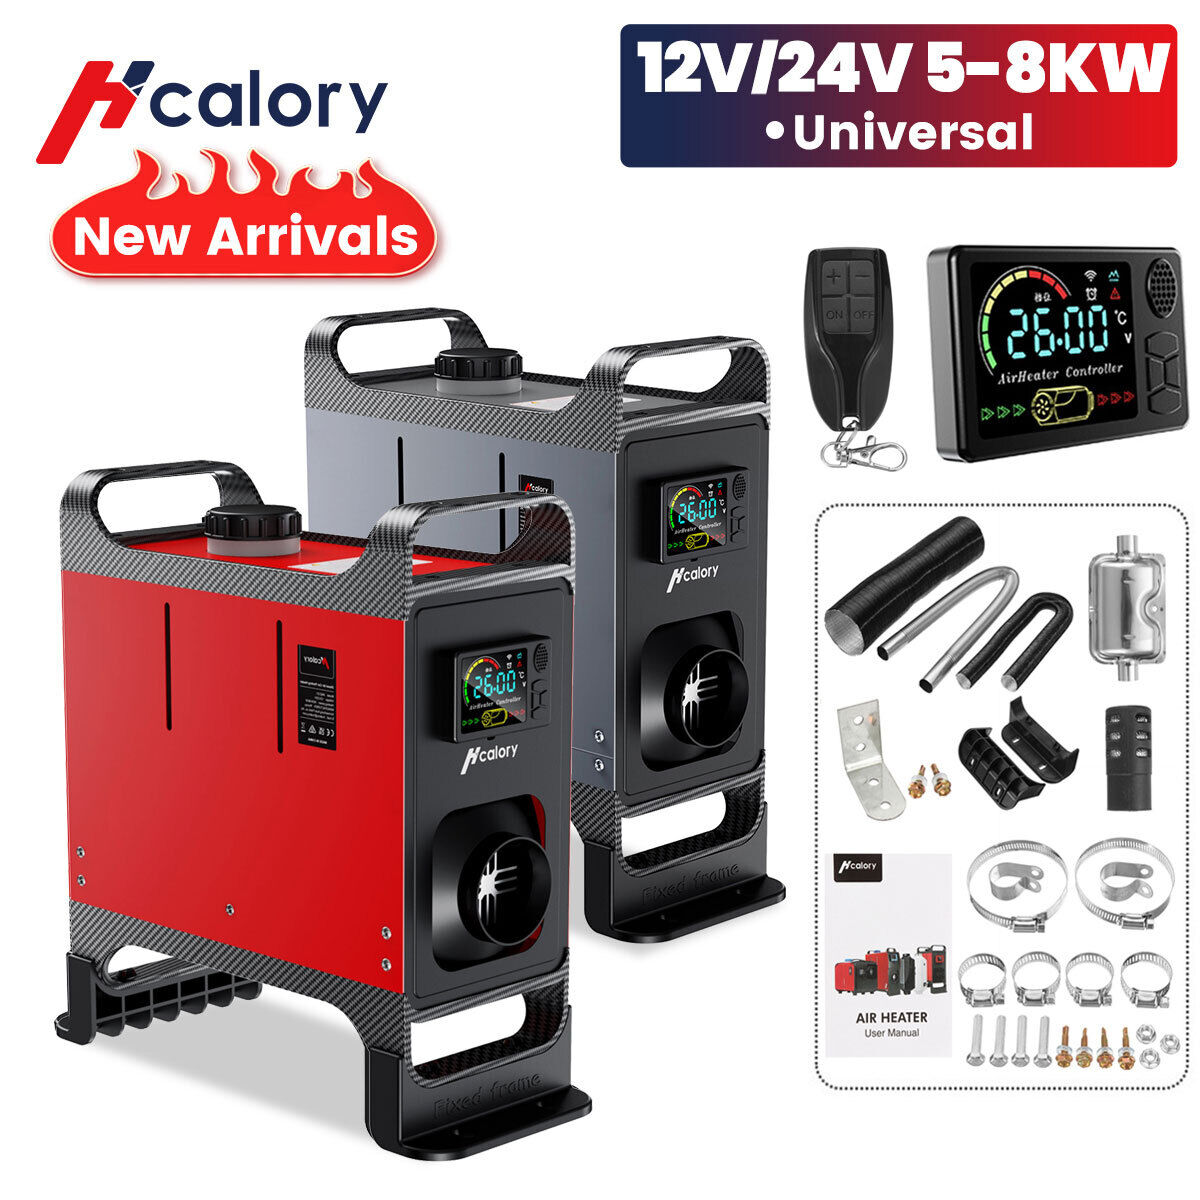 Hcalory Diesel Air Heater 8KW 12V 24V LCD w/ bluetooth Control For Boat Truck